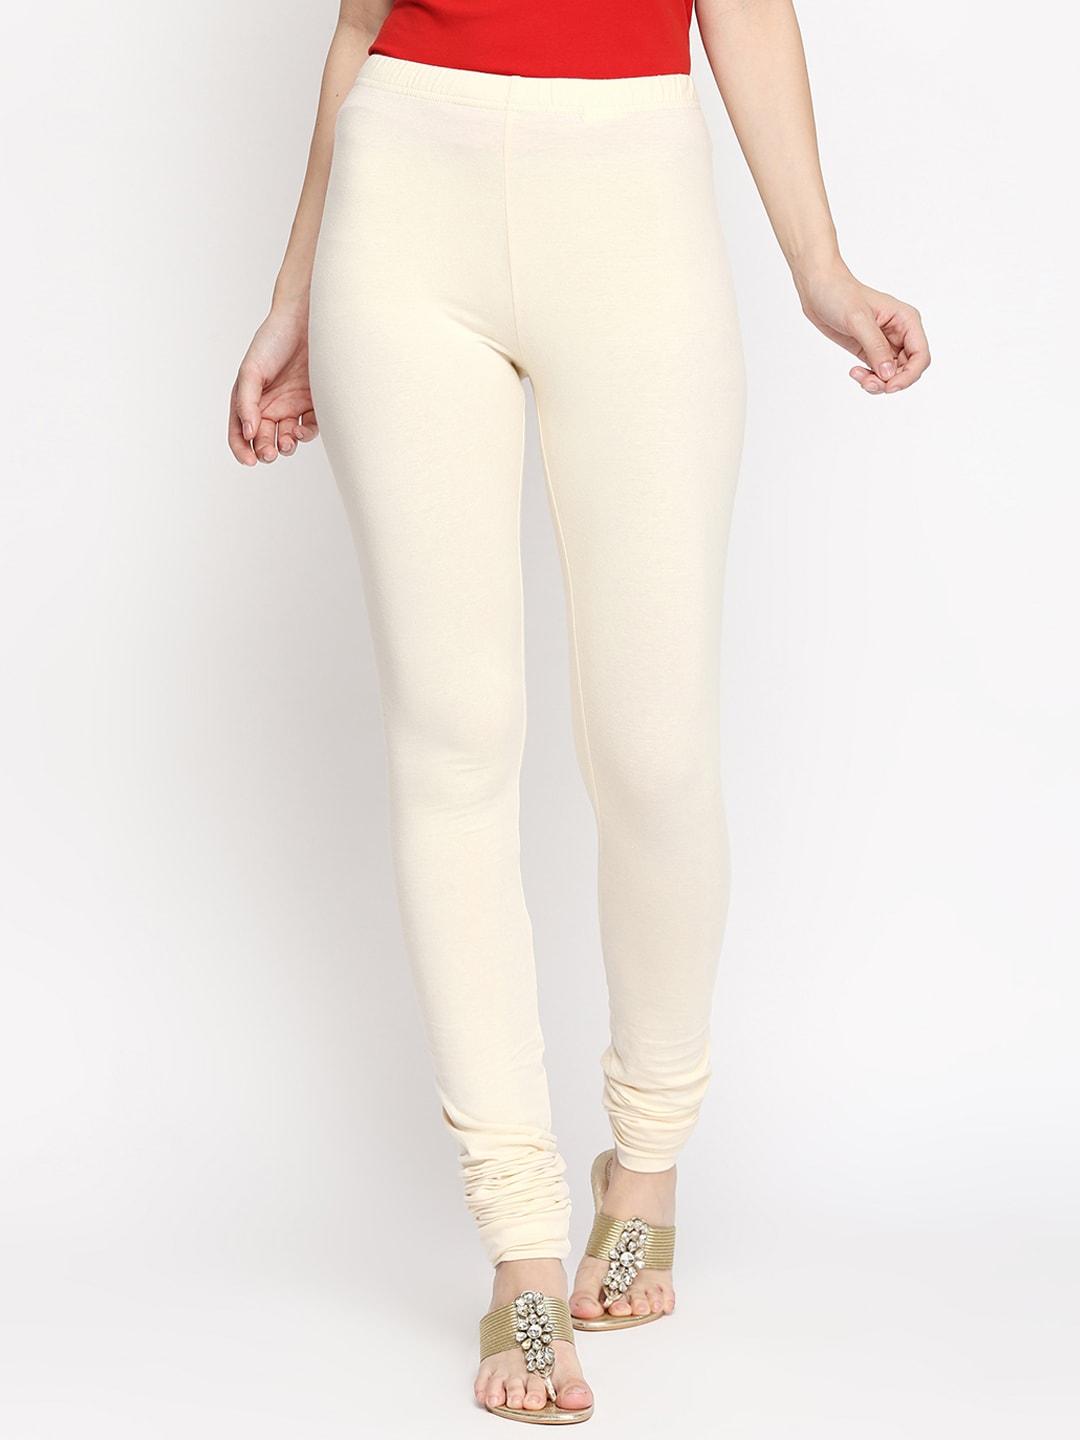 RANGMANCH BY PANTALOONS Women Off-White Solid Slim Fit Leggings Price in India